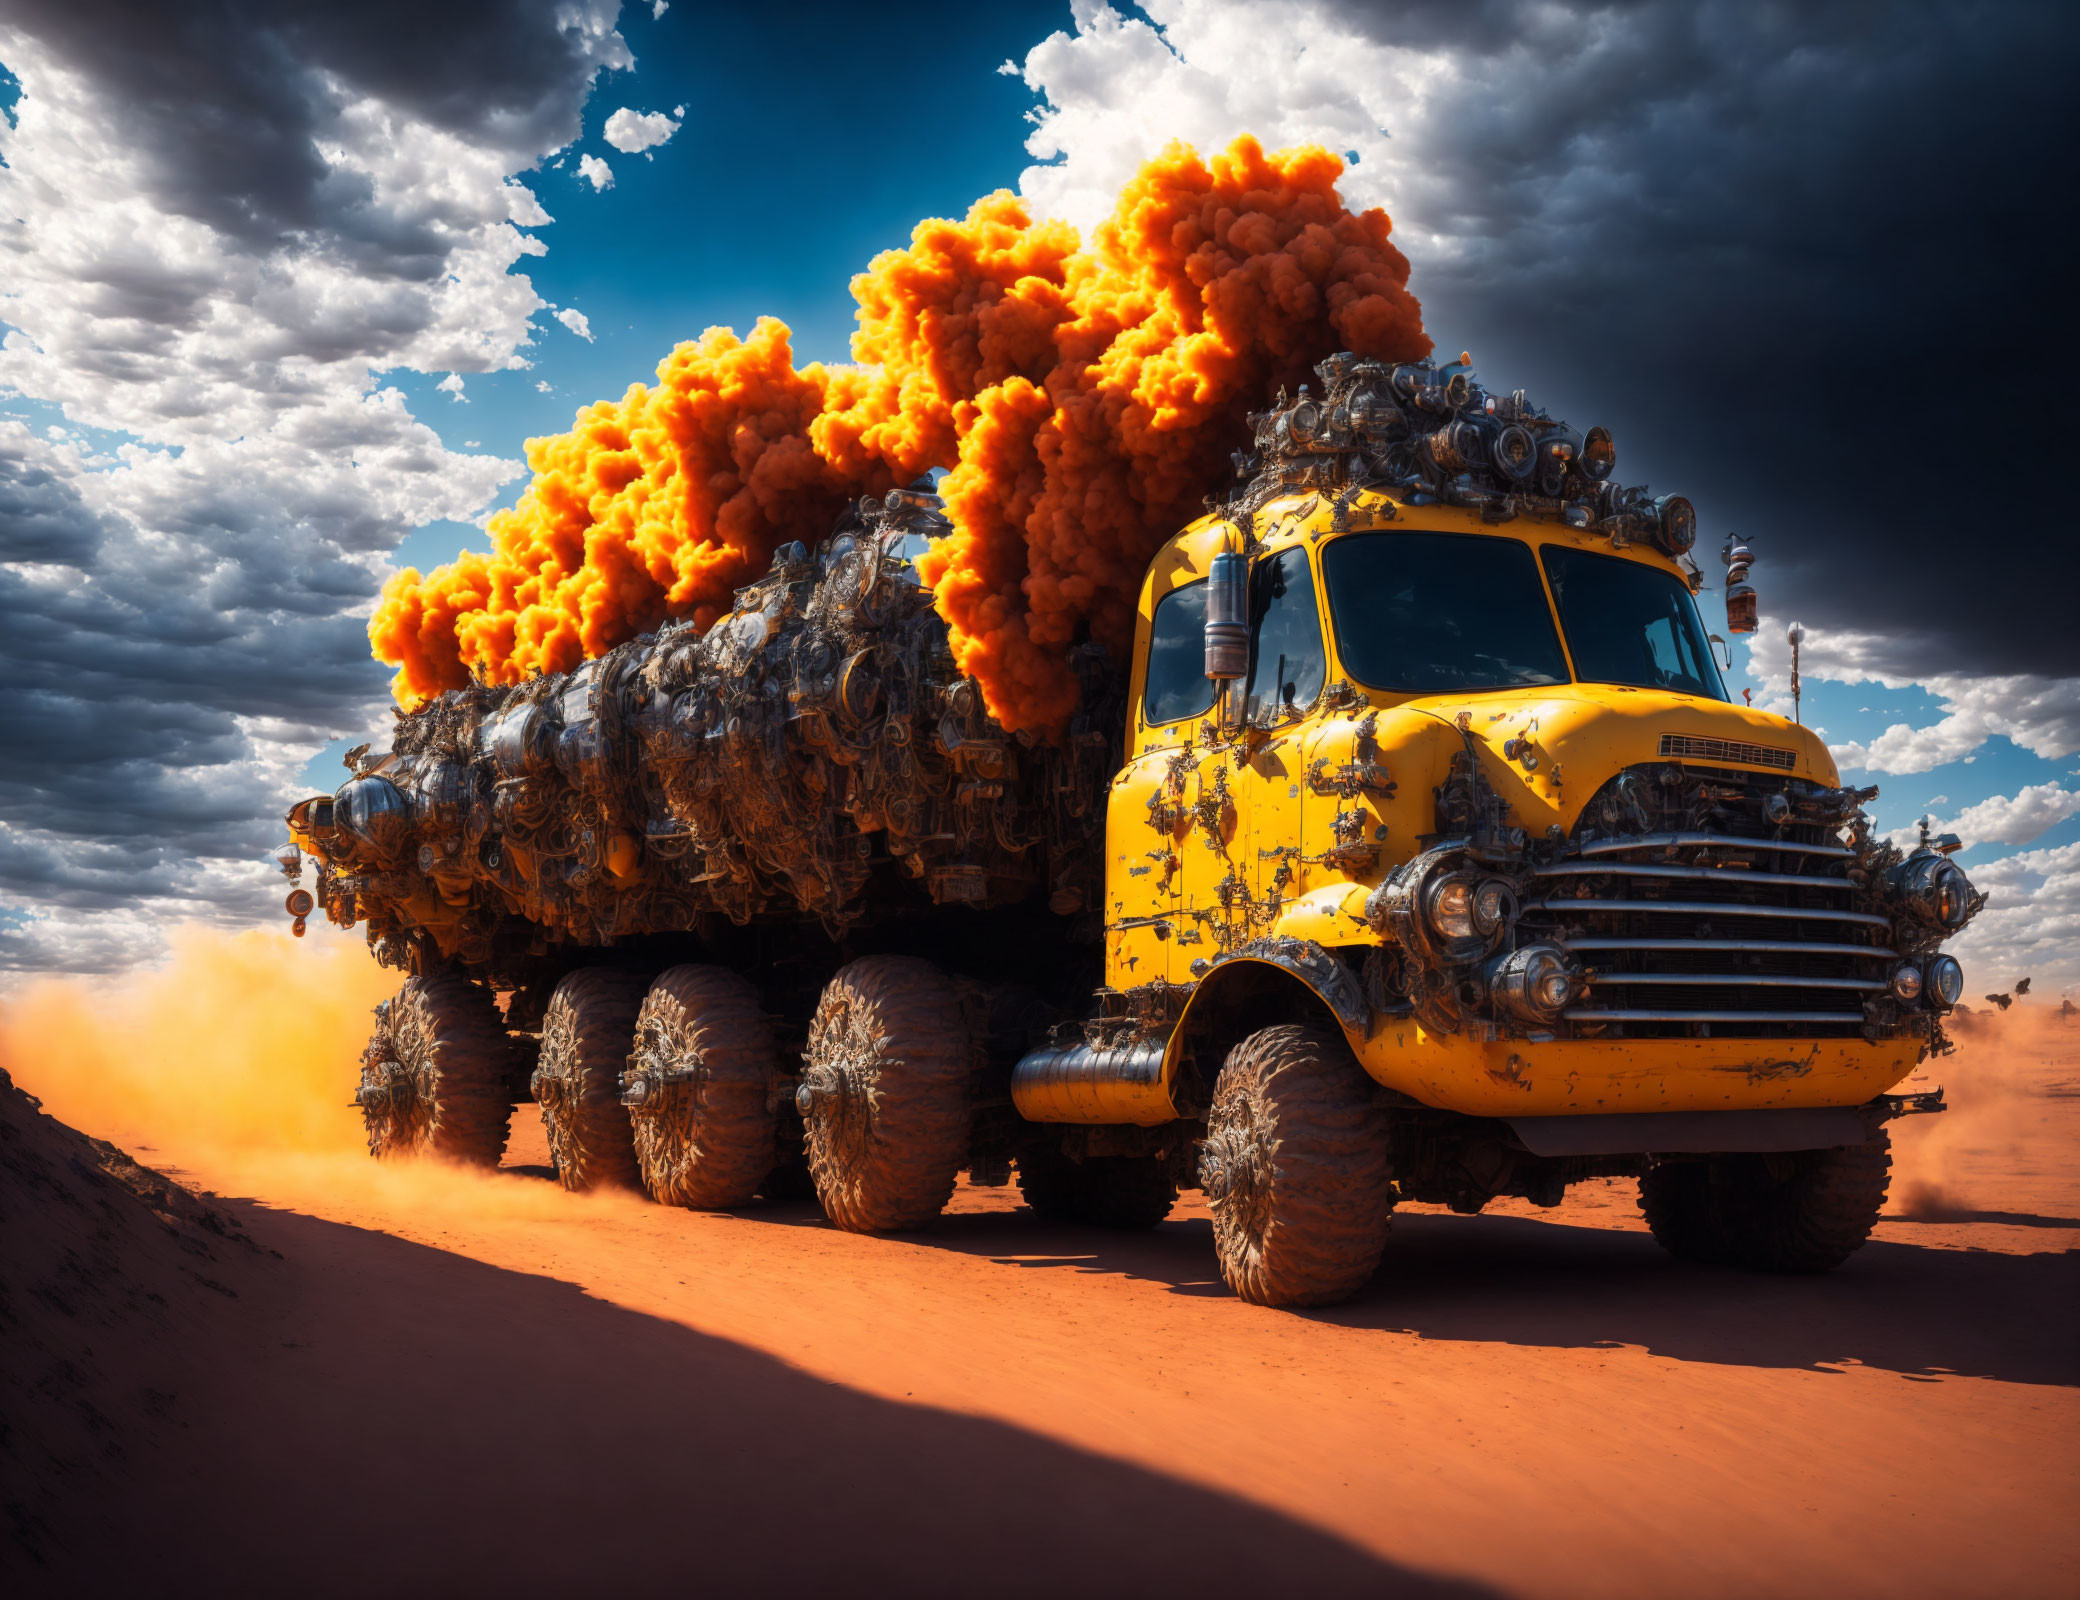 Yellow retrofitted truck with oversized tires driving through desert with orange smoke under dramatic sky